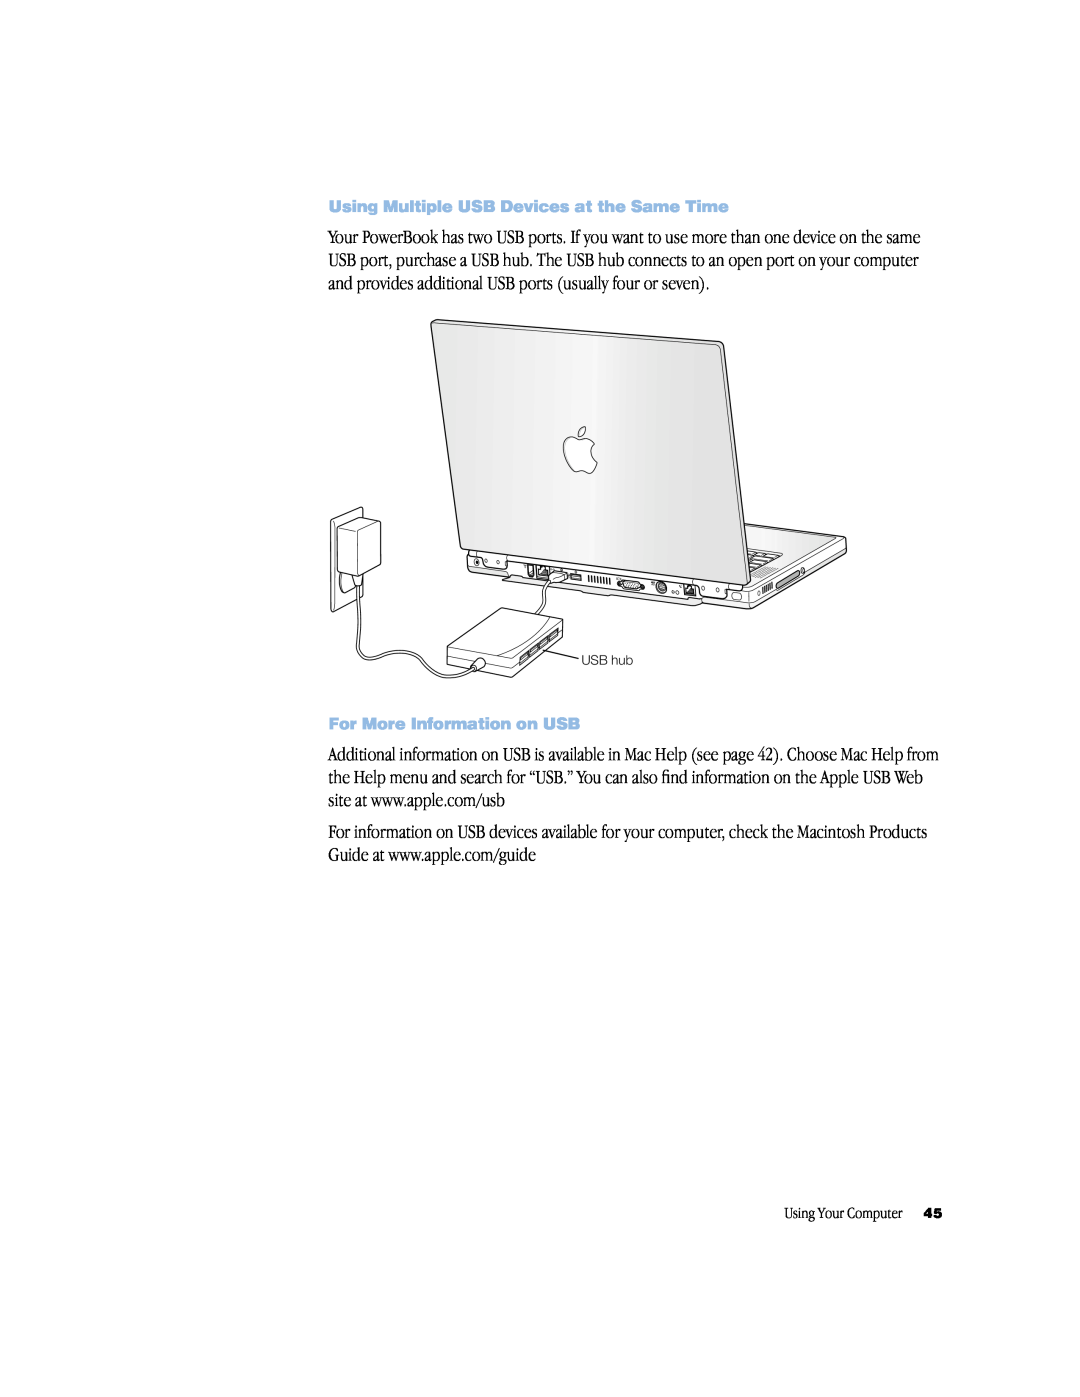 Apple powerbook g4 manual Using Multiple USB Devices at the Same Time, For More Information on USB, Using Your Computer 